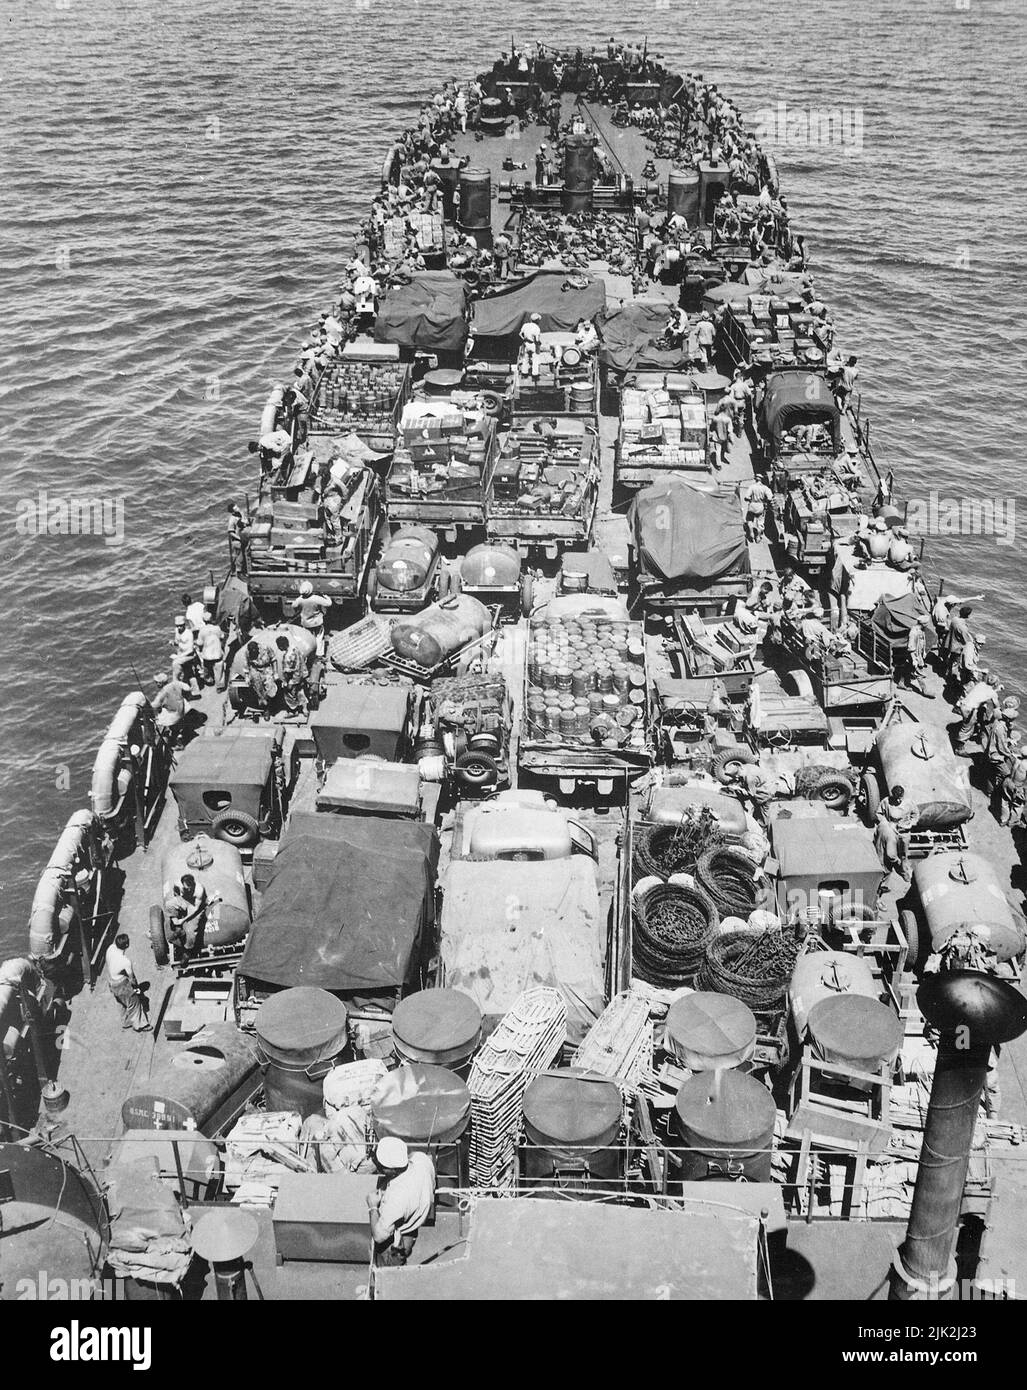 Invasion of Cape Gloucester, New Britain, 24 December 1943.  The deck of a  Coast Guard-manned LST (Landing Ship-Tank) is crammed with men and material for the invasion. Stock Photo